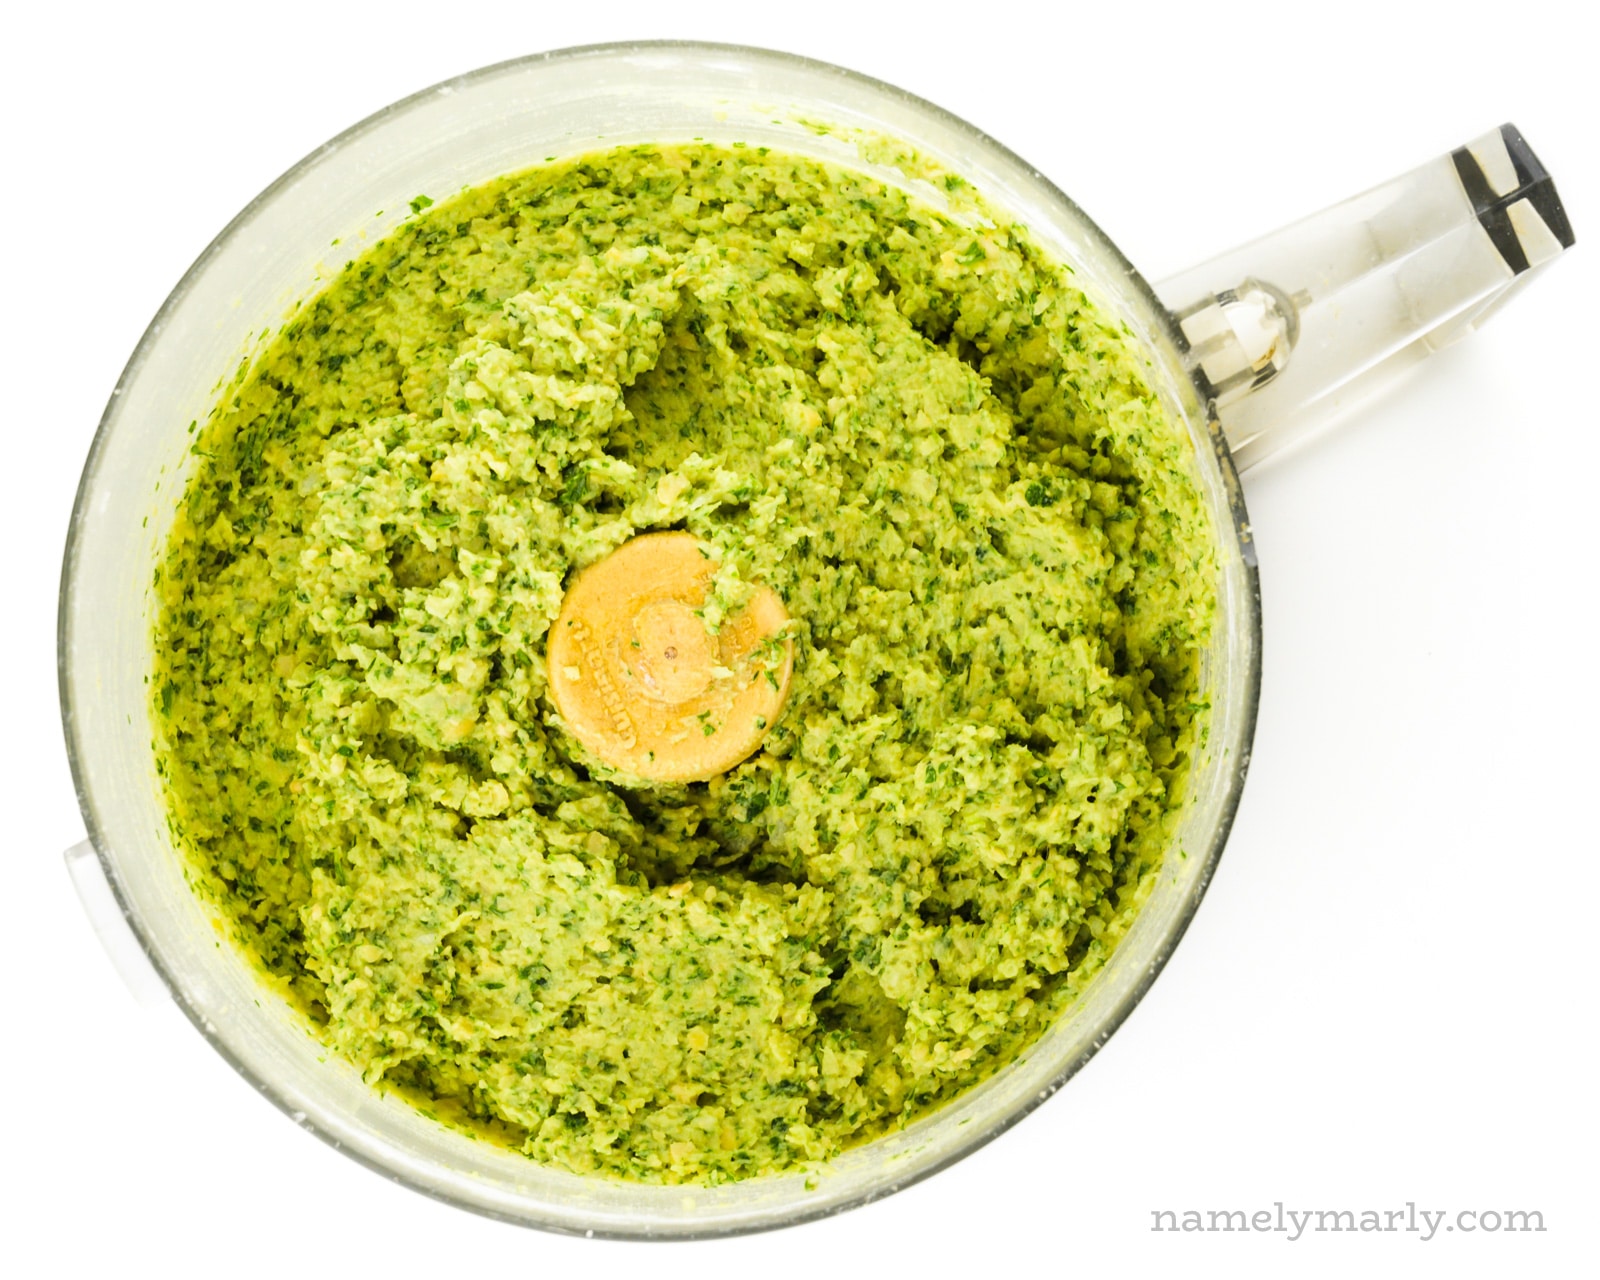 Looking down on a food processor bowl full of a green mixture of chickpeas ground with green herbs.